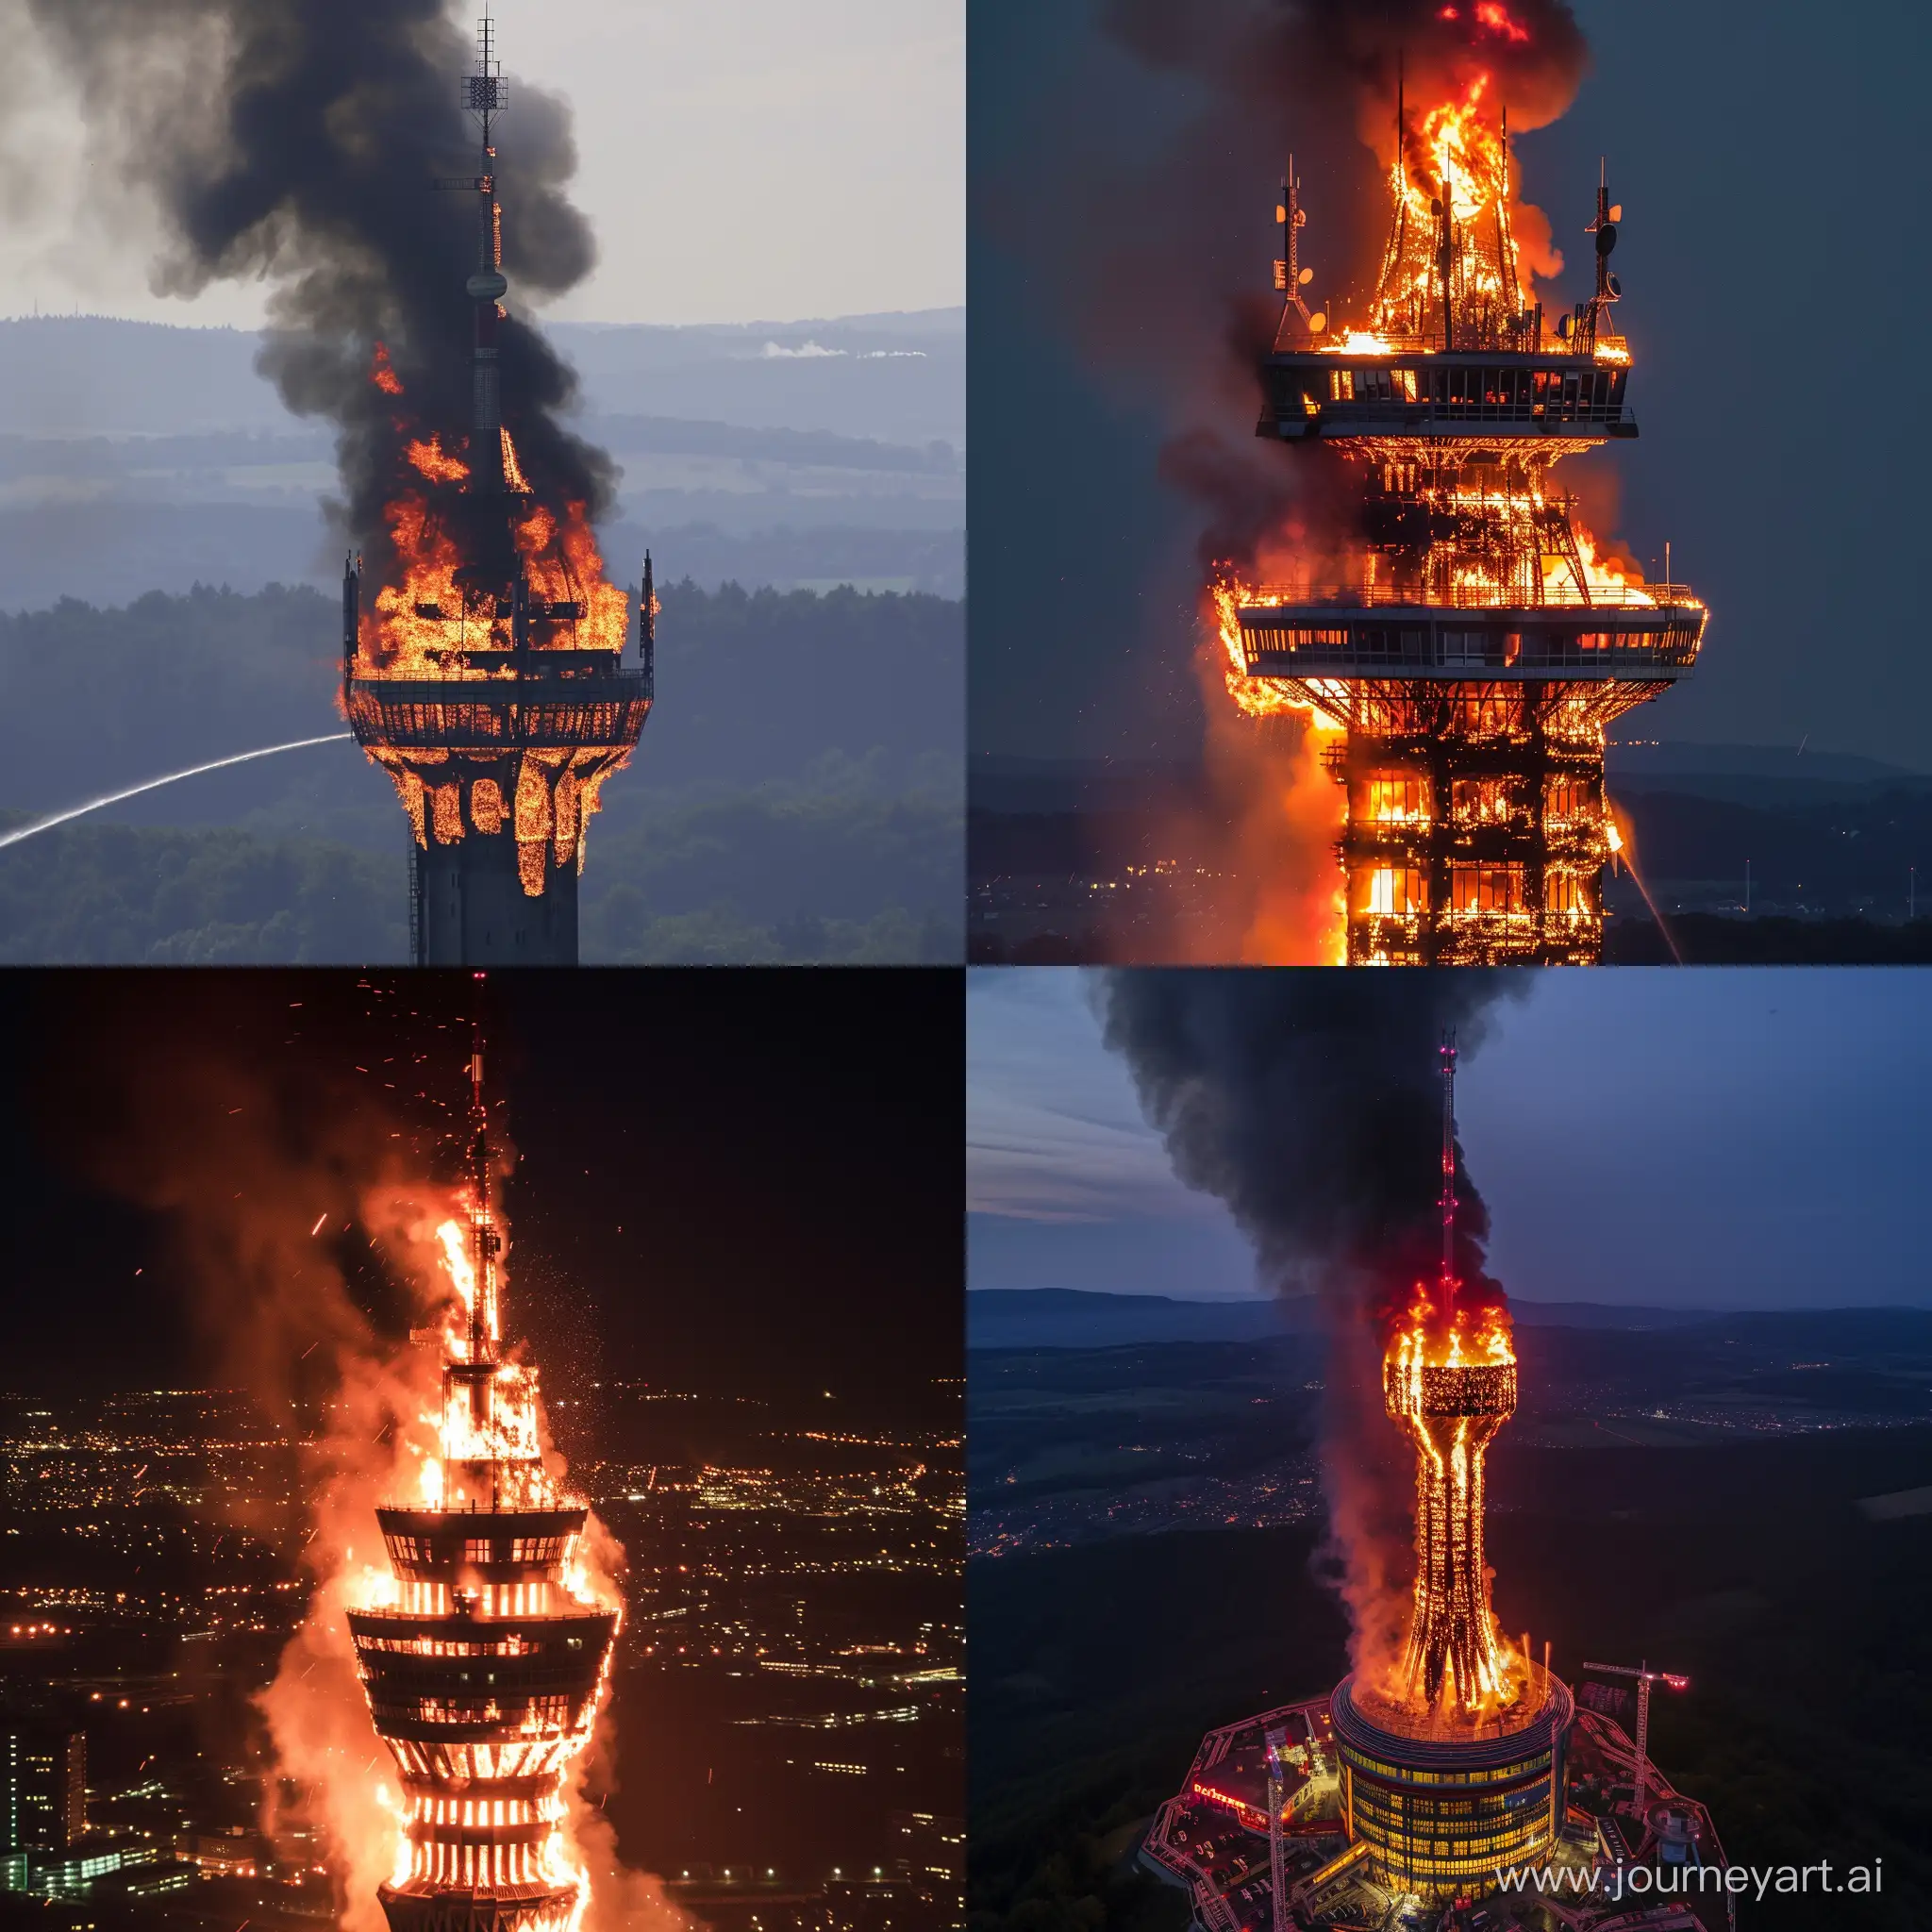 Eiffel-Tower-Engulfed-in-Flames-Surreal-Artistic-Image